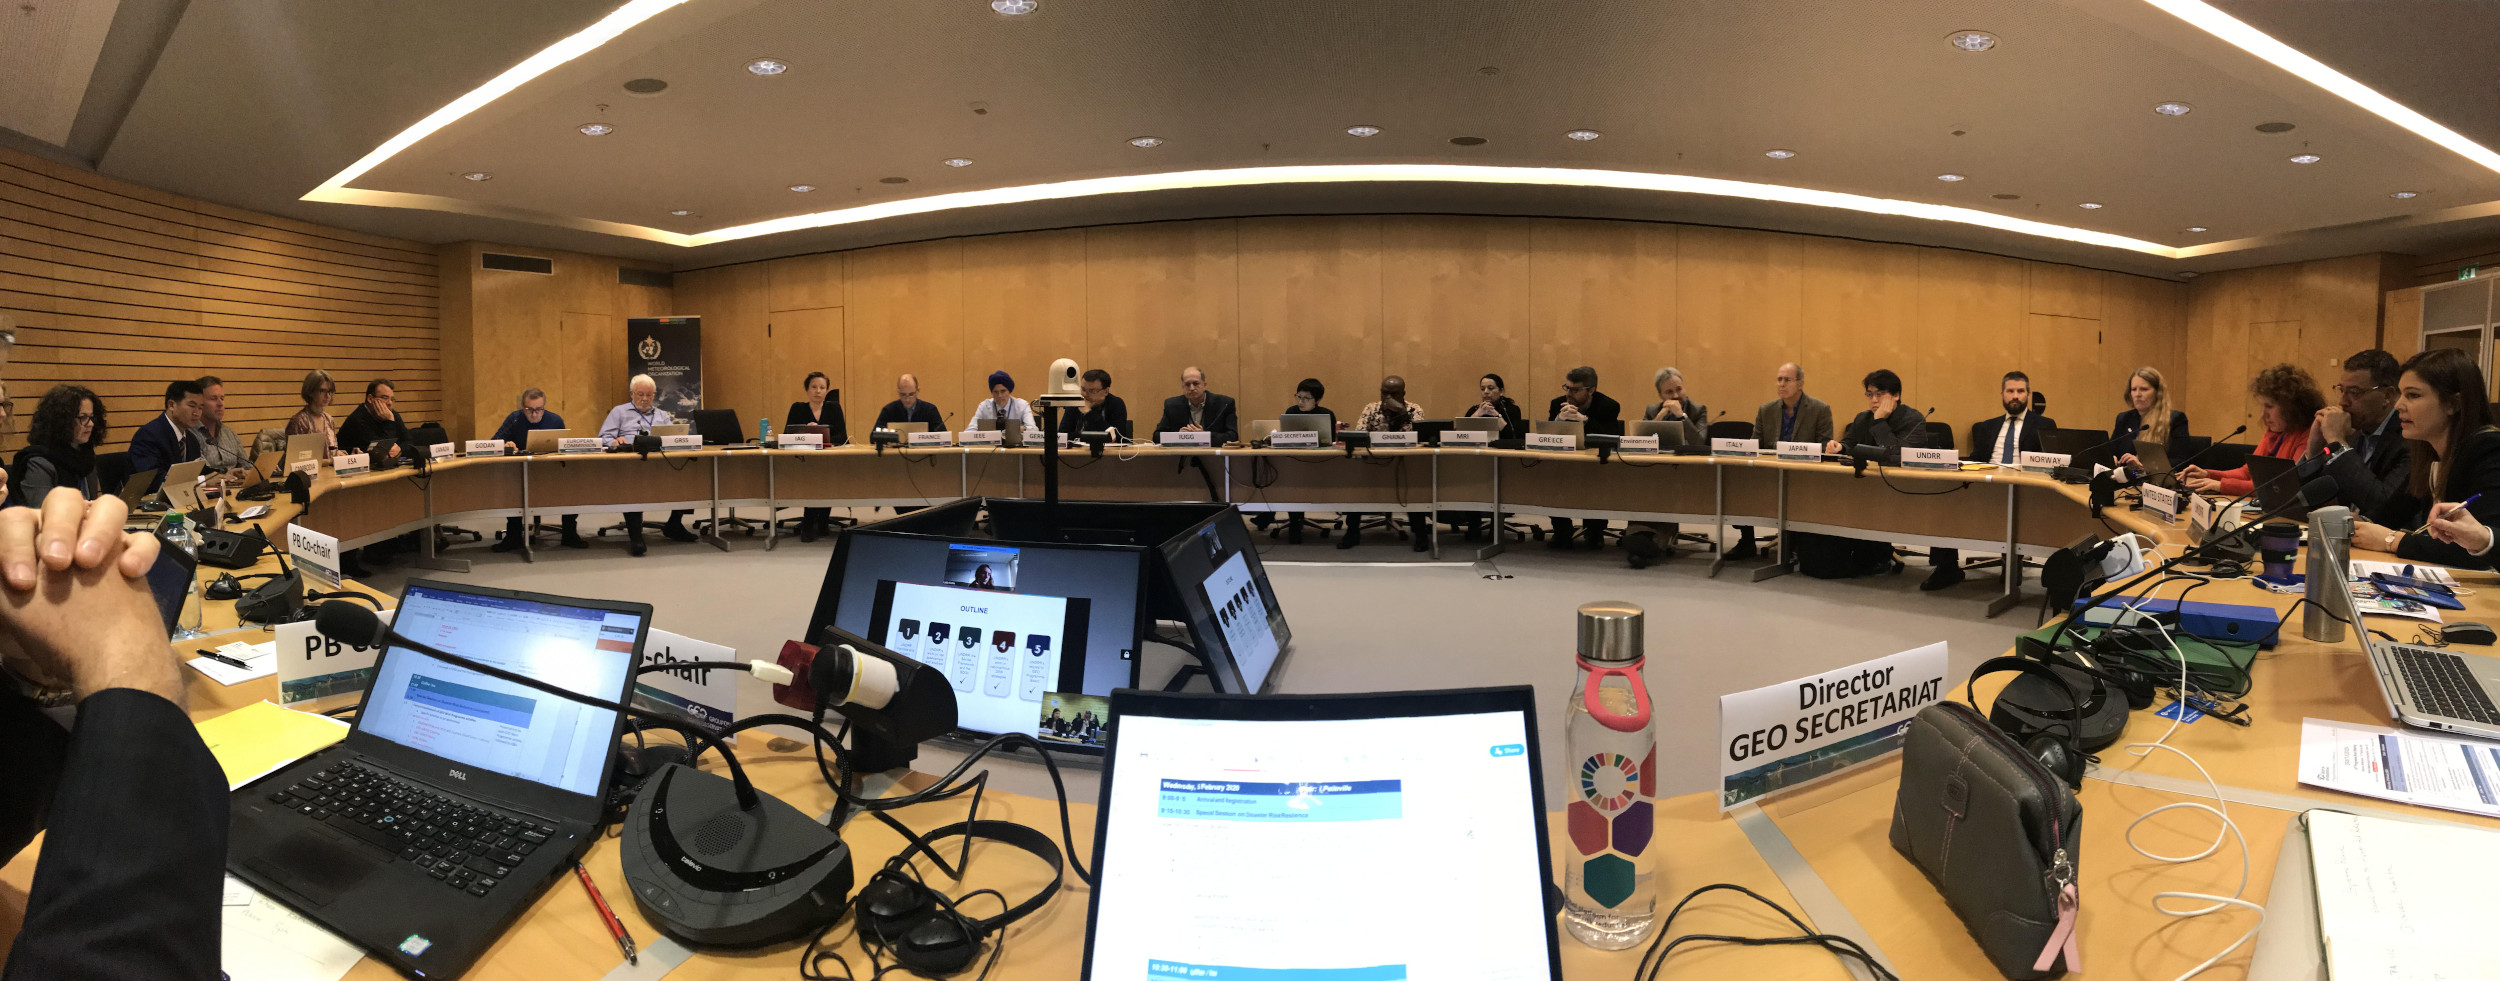 GEO Programme Board Meeting with United Nations Office of Disaster Risk Reduction (UNDRR) at WMO, Geneva, Switzerland